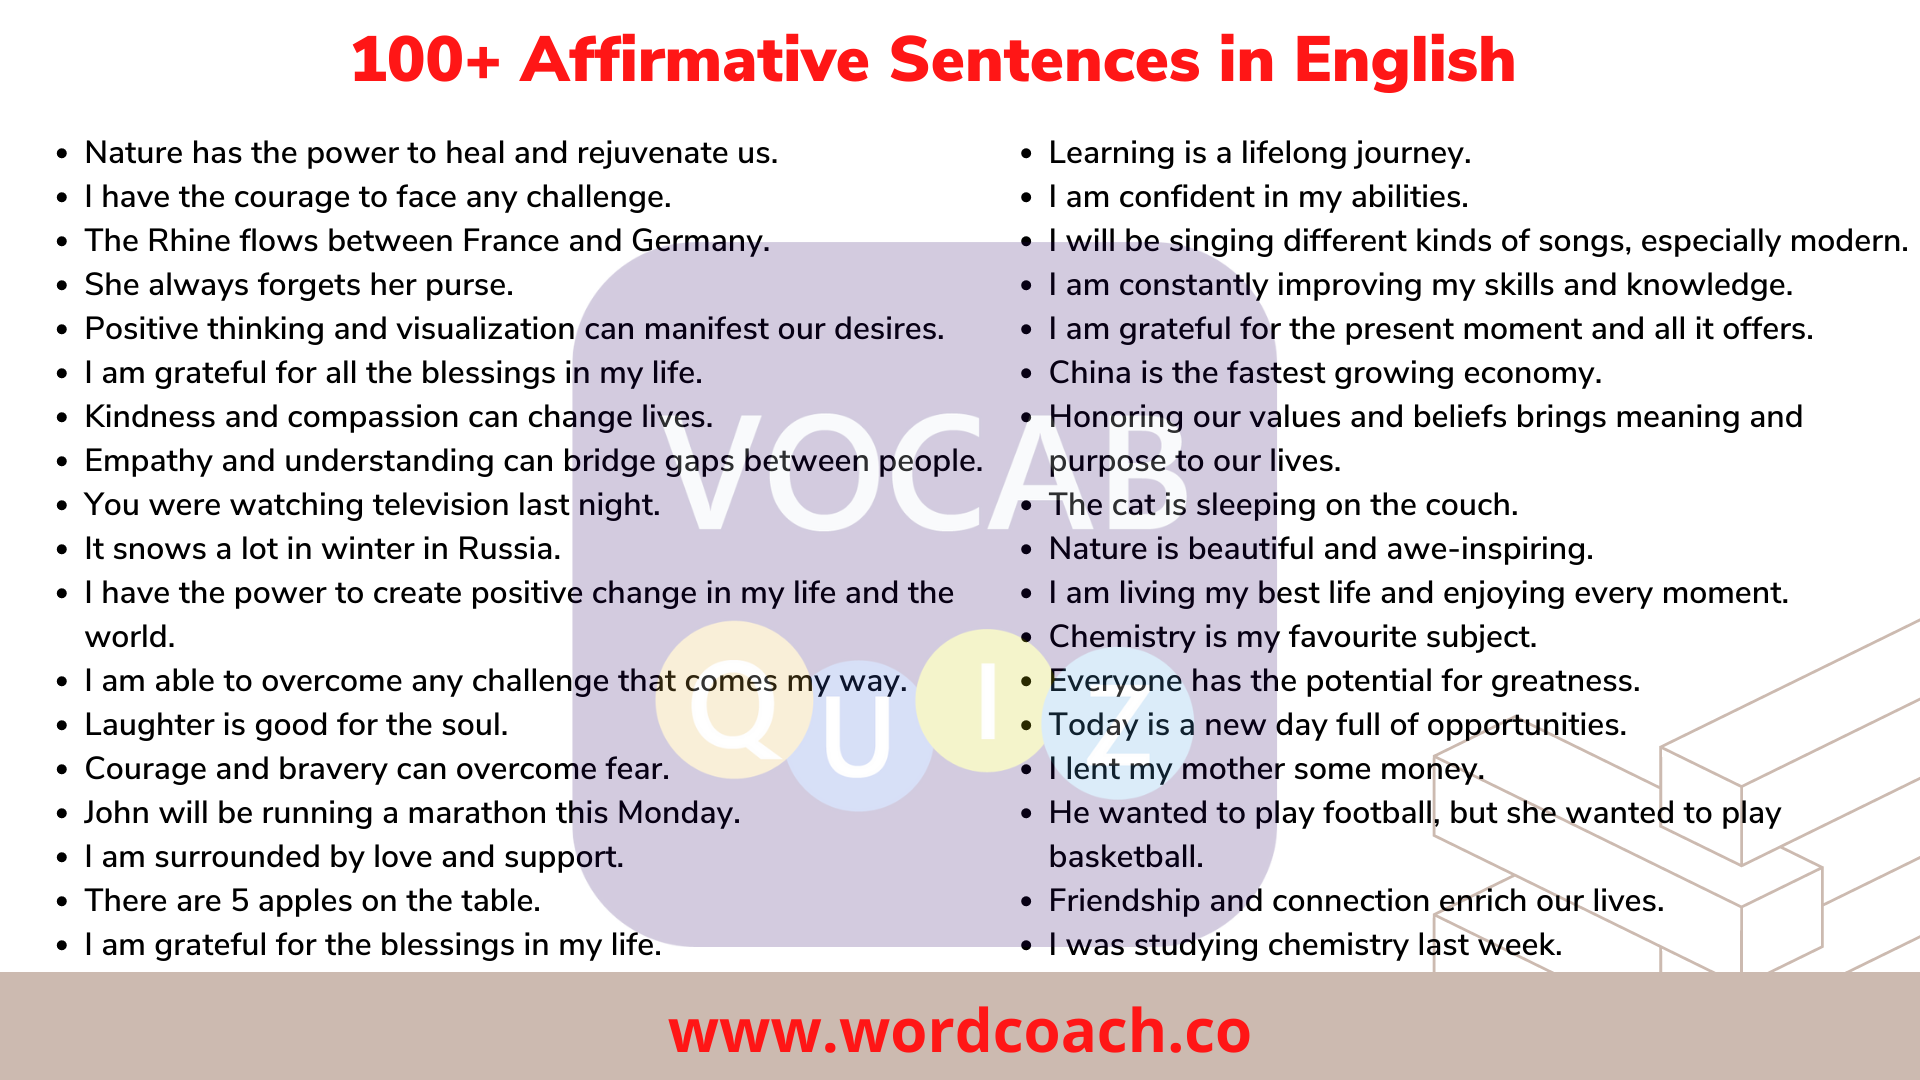 100+ Affirmative Sentences in English - wordcoach.co